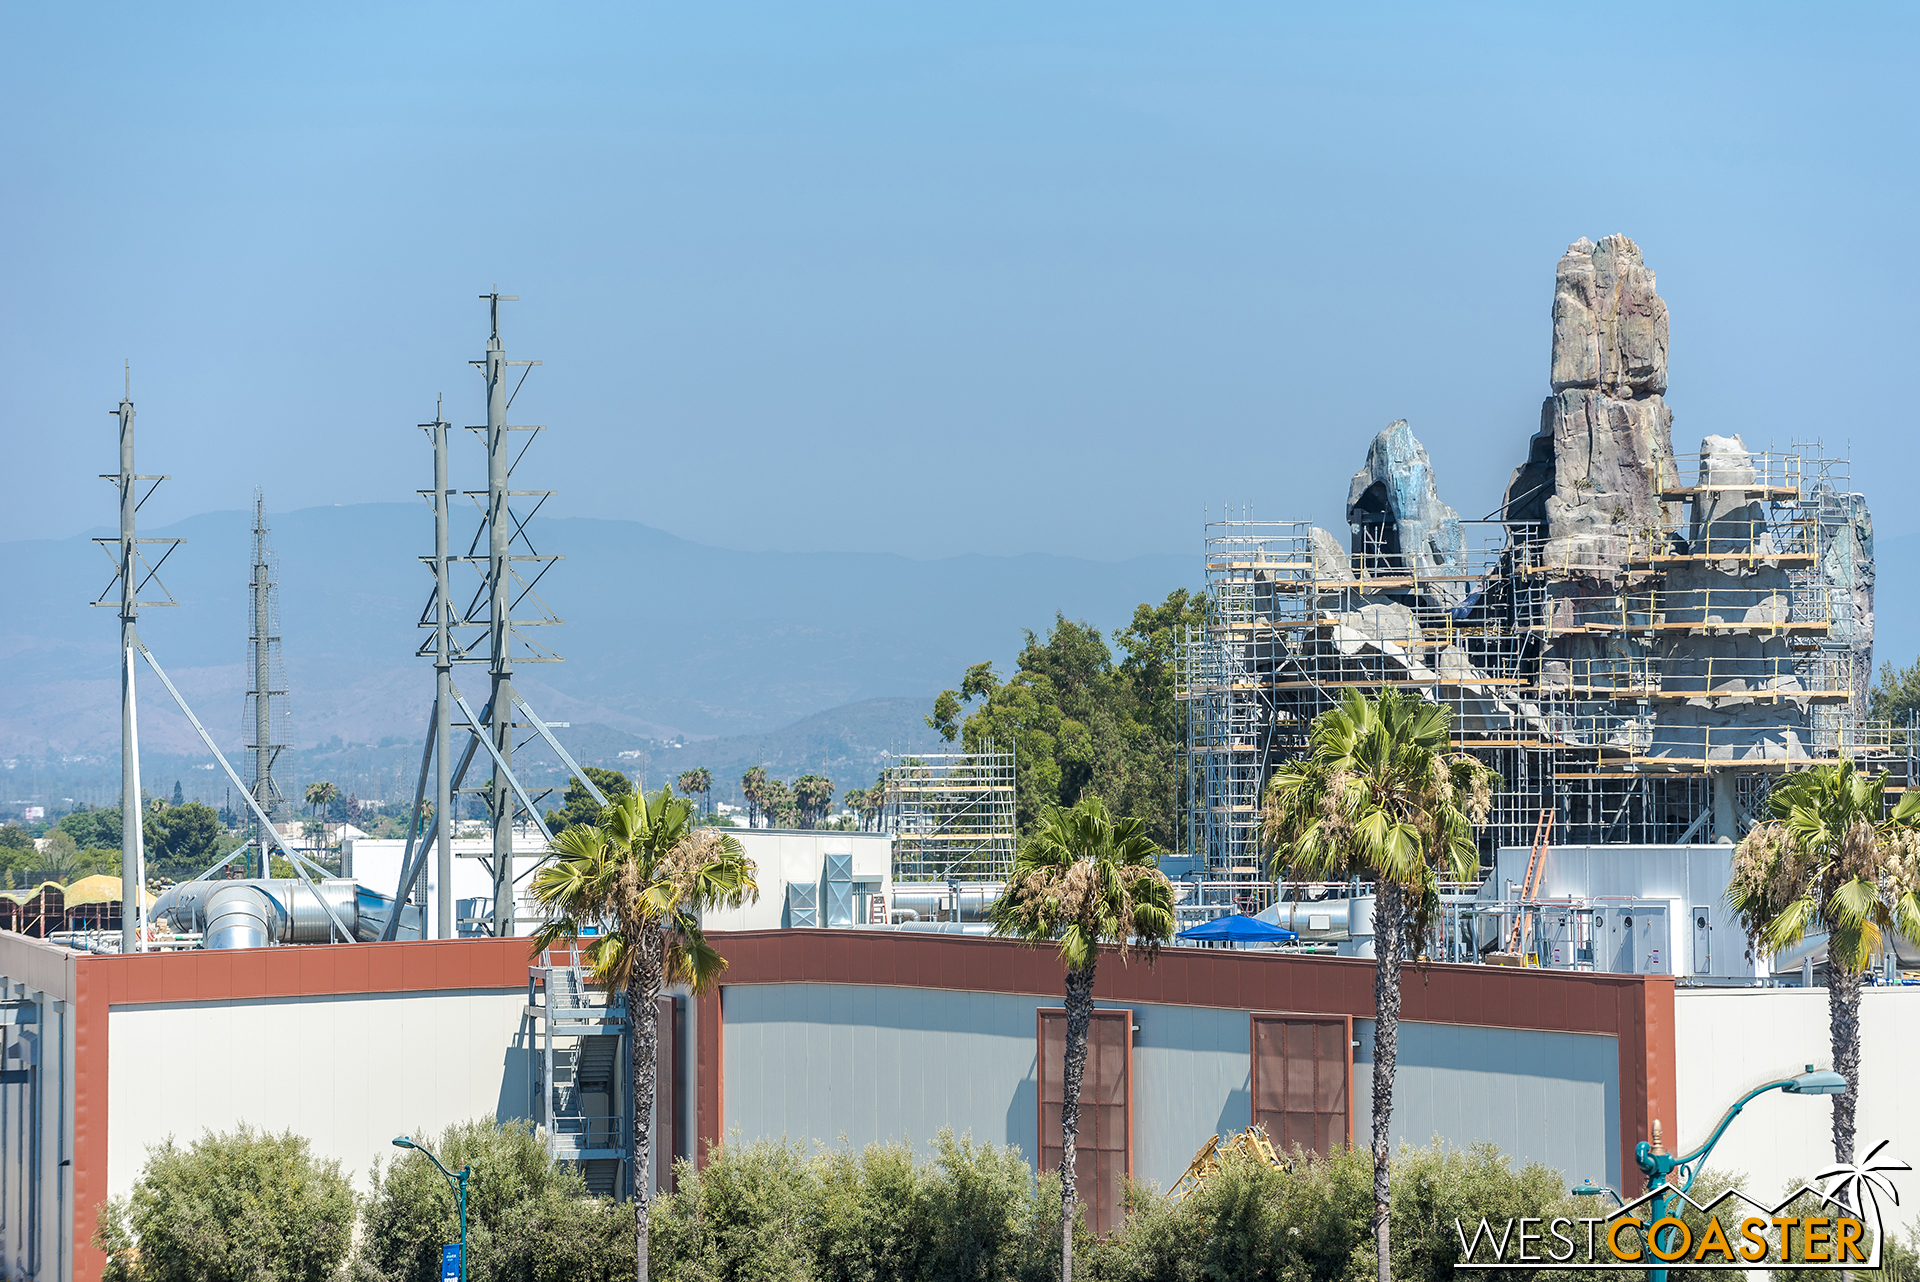  Some new steel columns and outriggers have appeared over the Millennium Falcon ride building. 